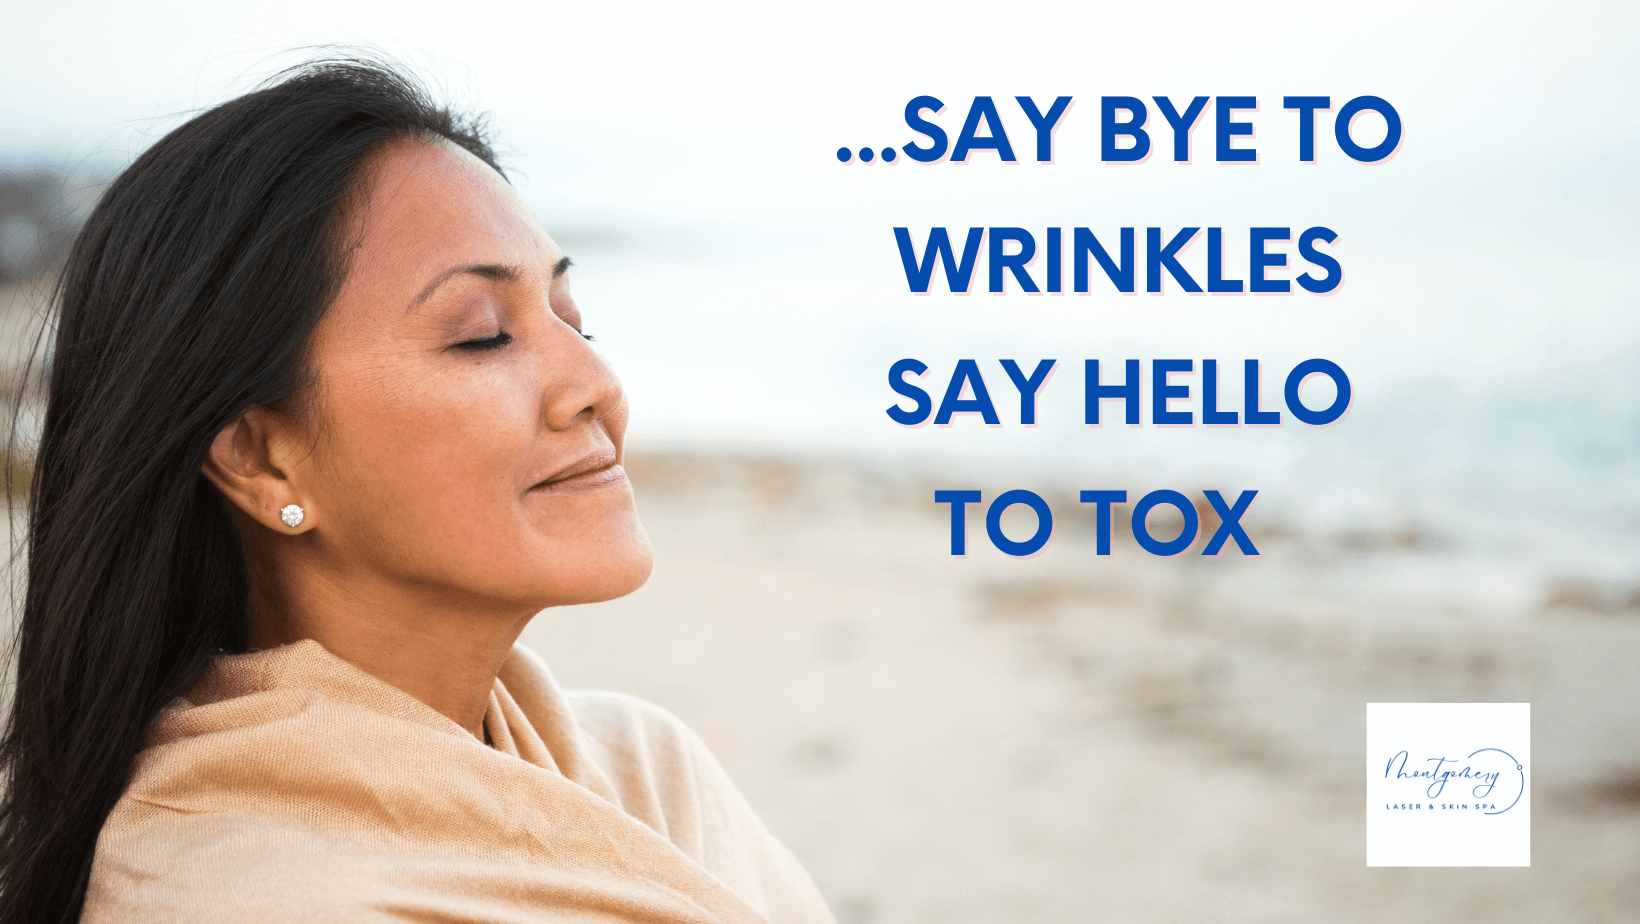 Tox for wrinkle reduction at Montgomery Laser and Skin Spa